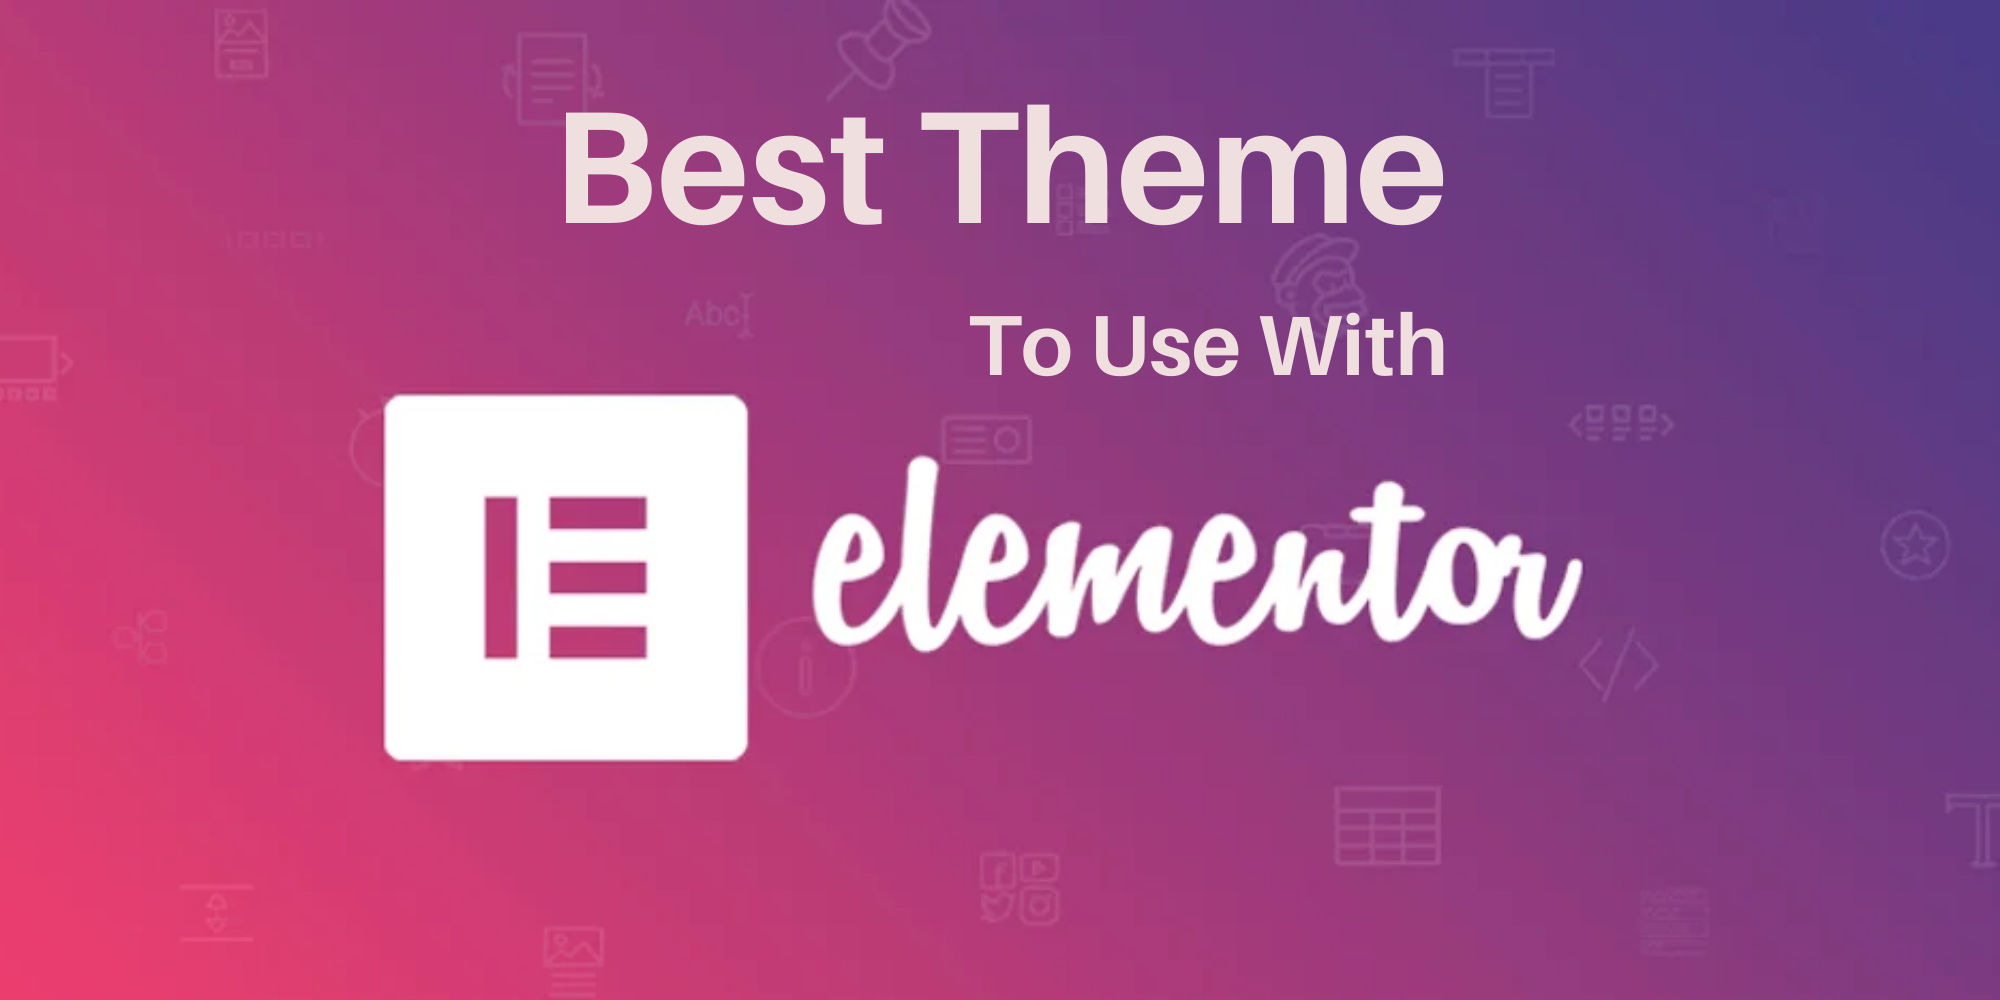 best theme to use with elementor